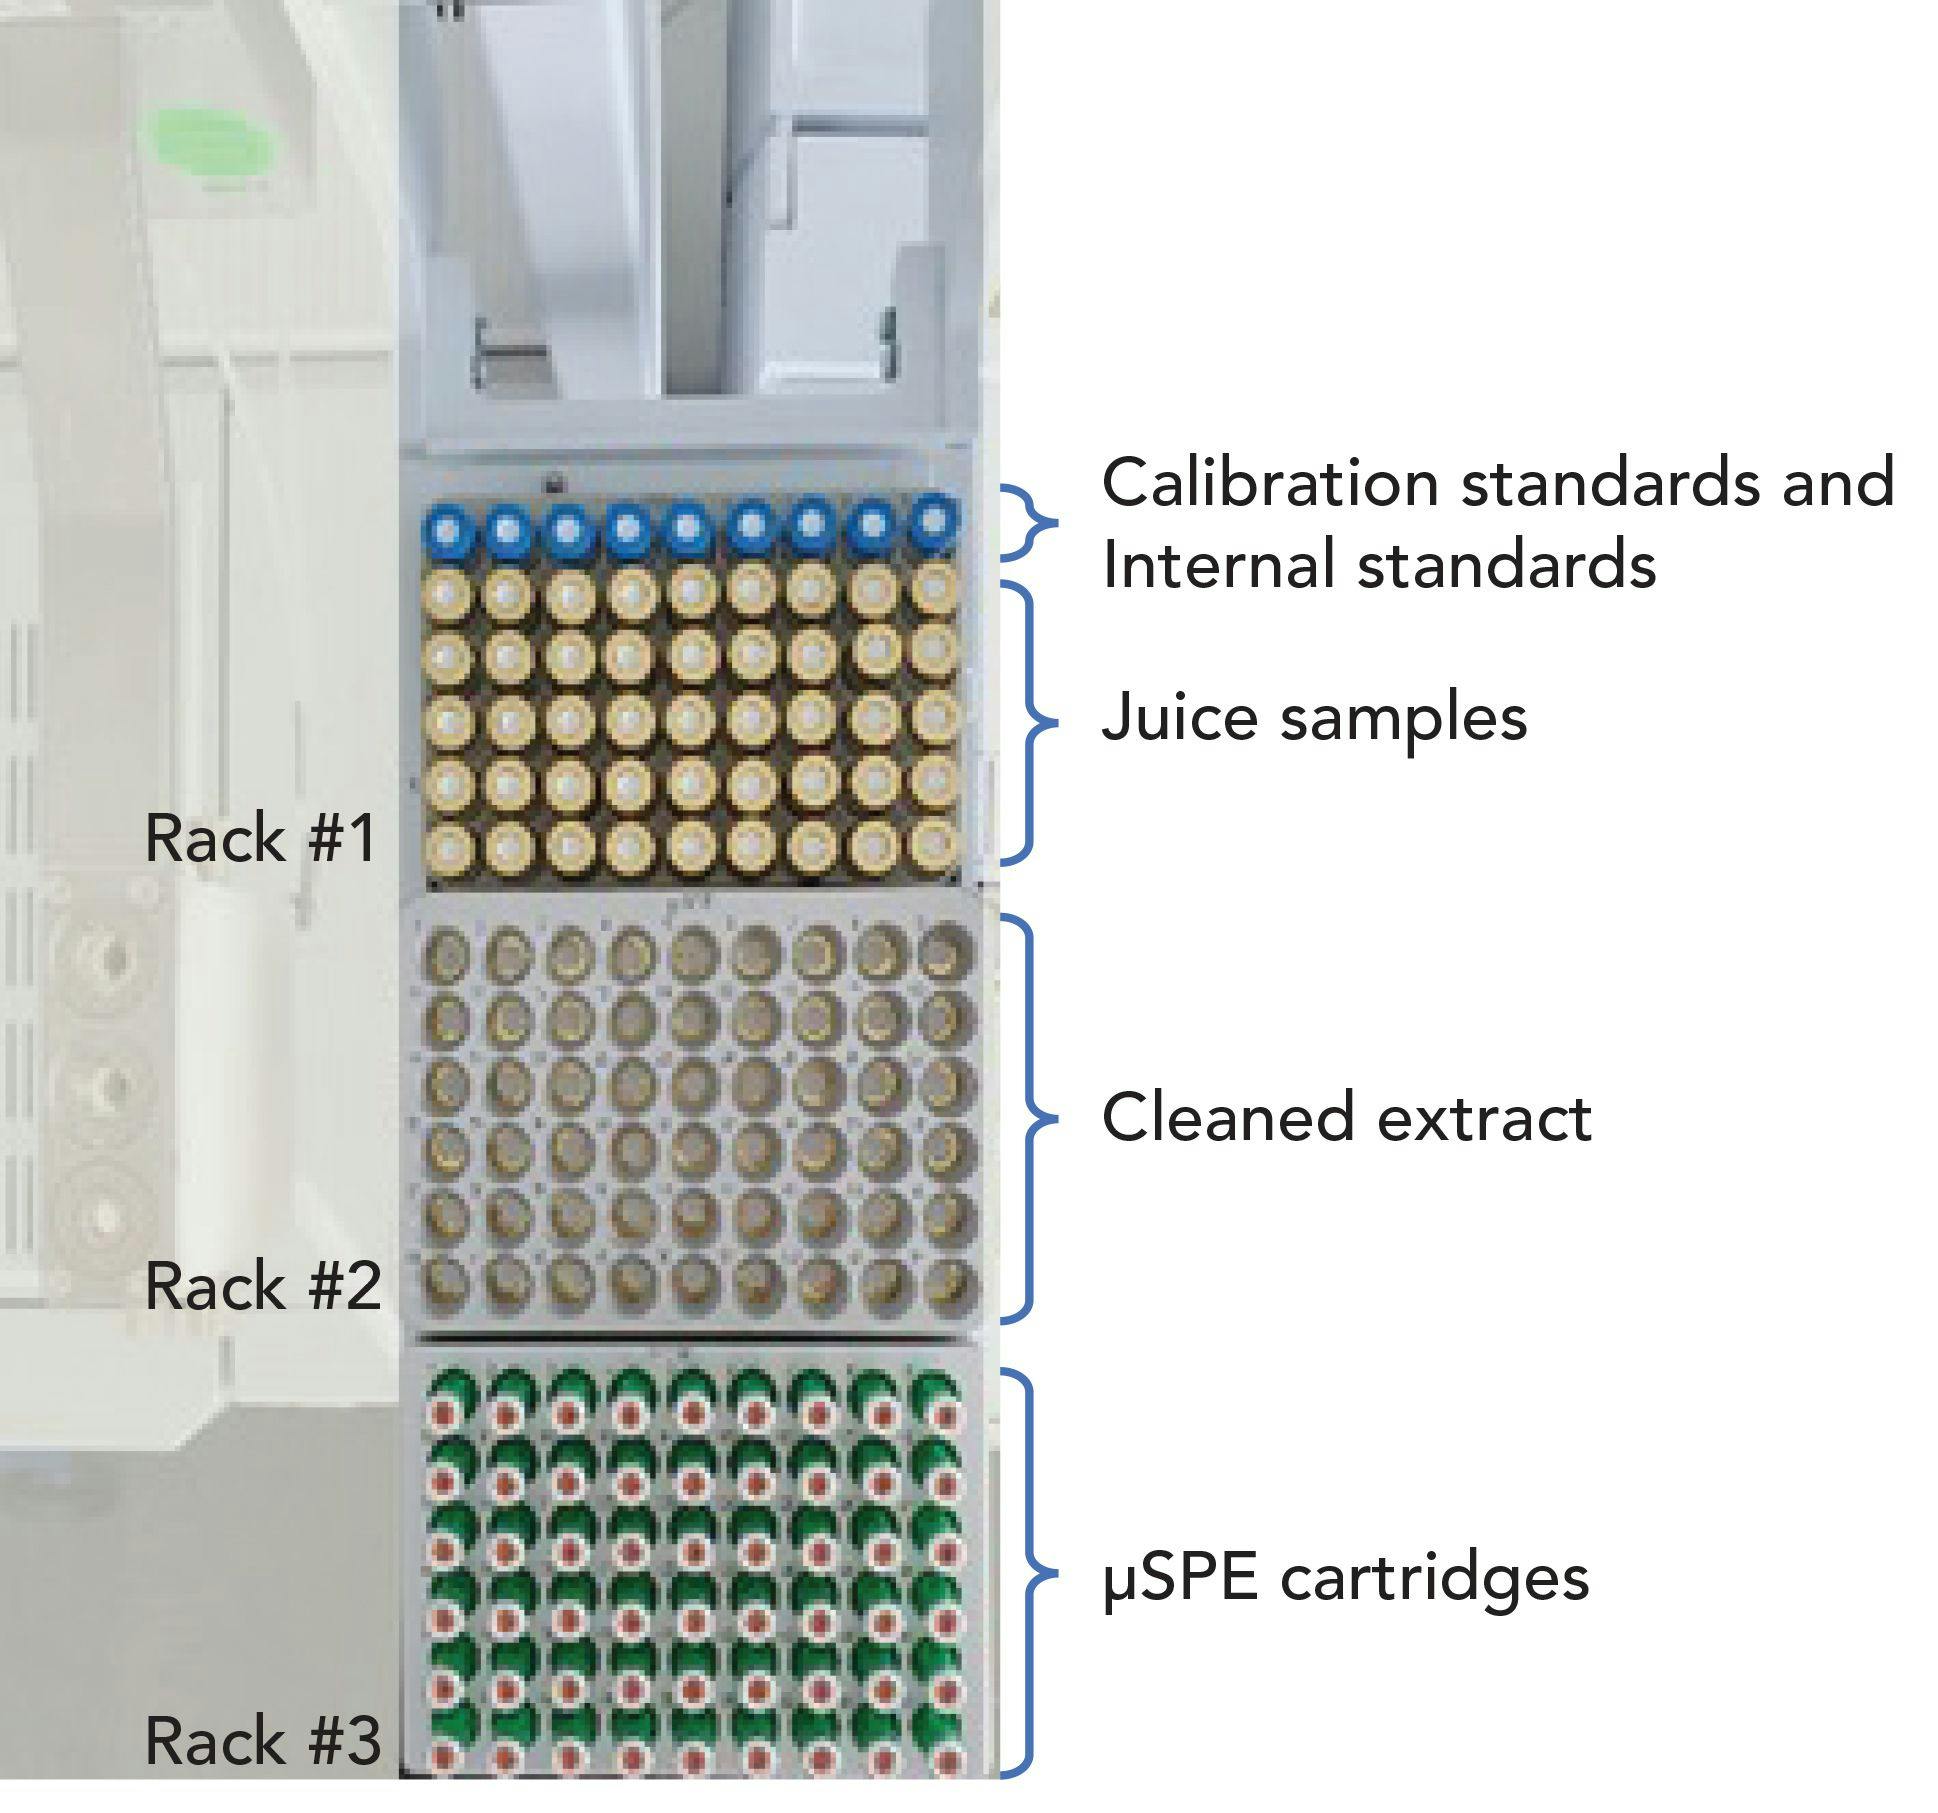 FIGURE 2: Tray holder top view showing the rack placement of standards, samples, cleaned extracts, and the μSPE cartridge reservoir.